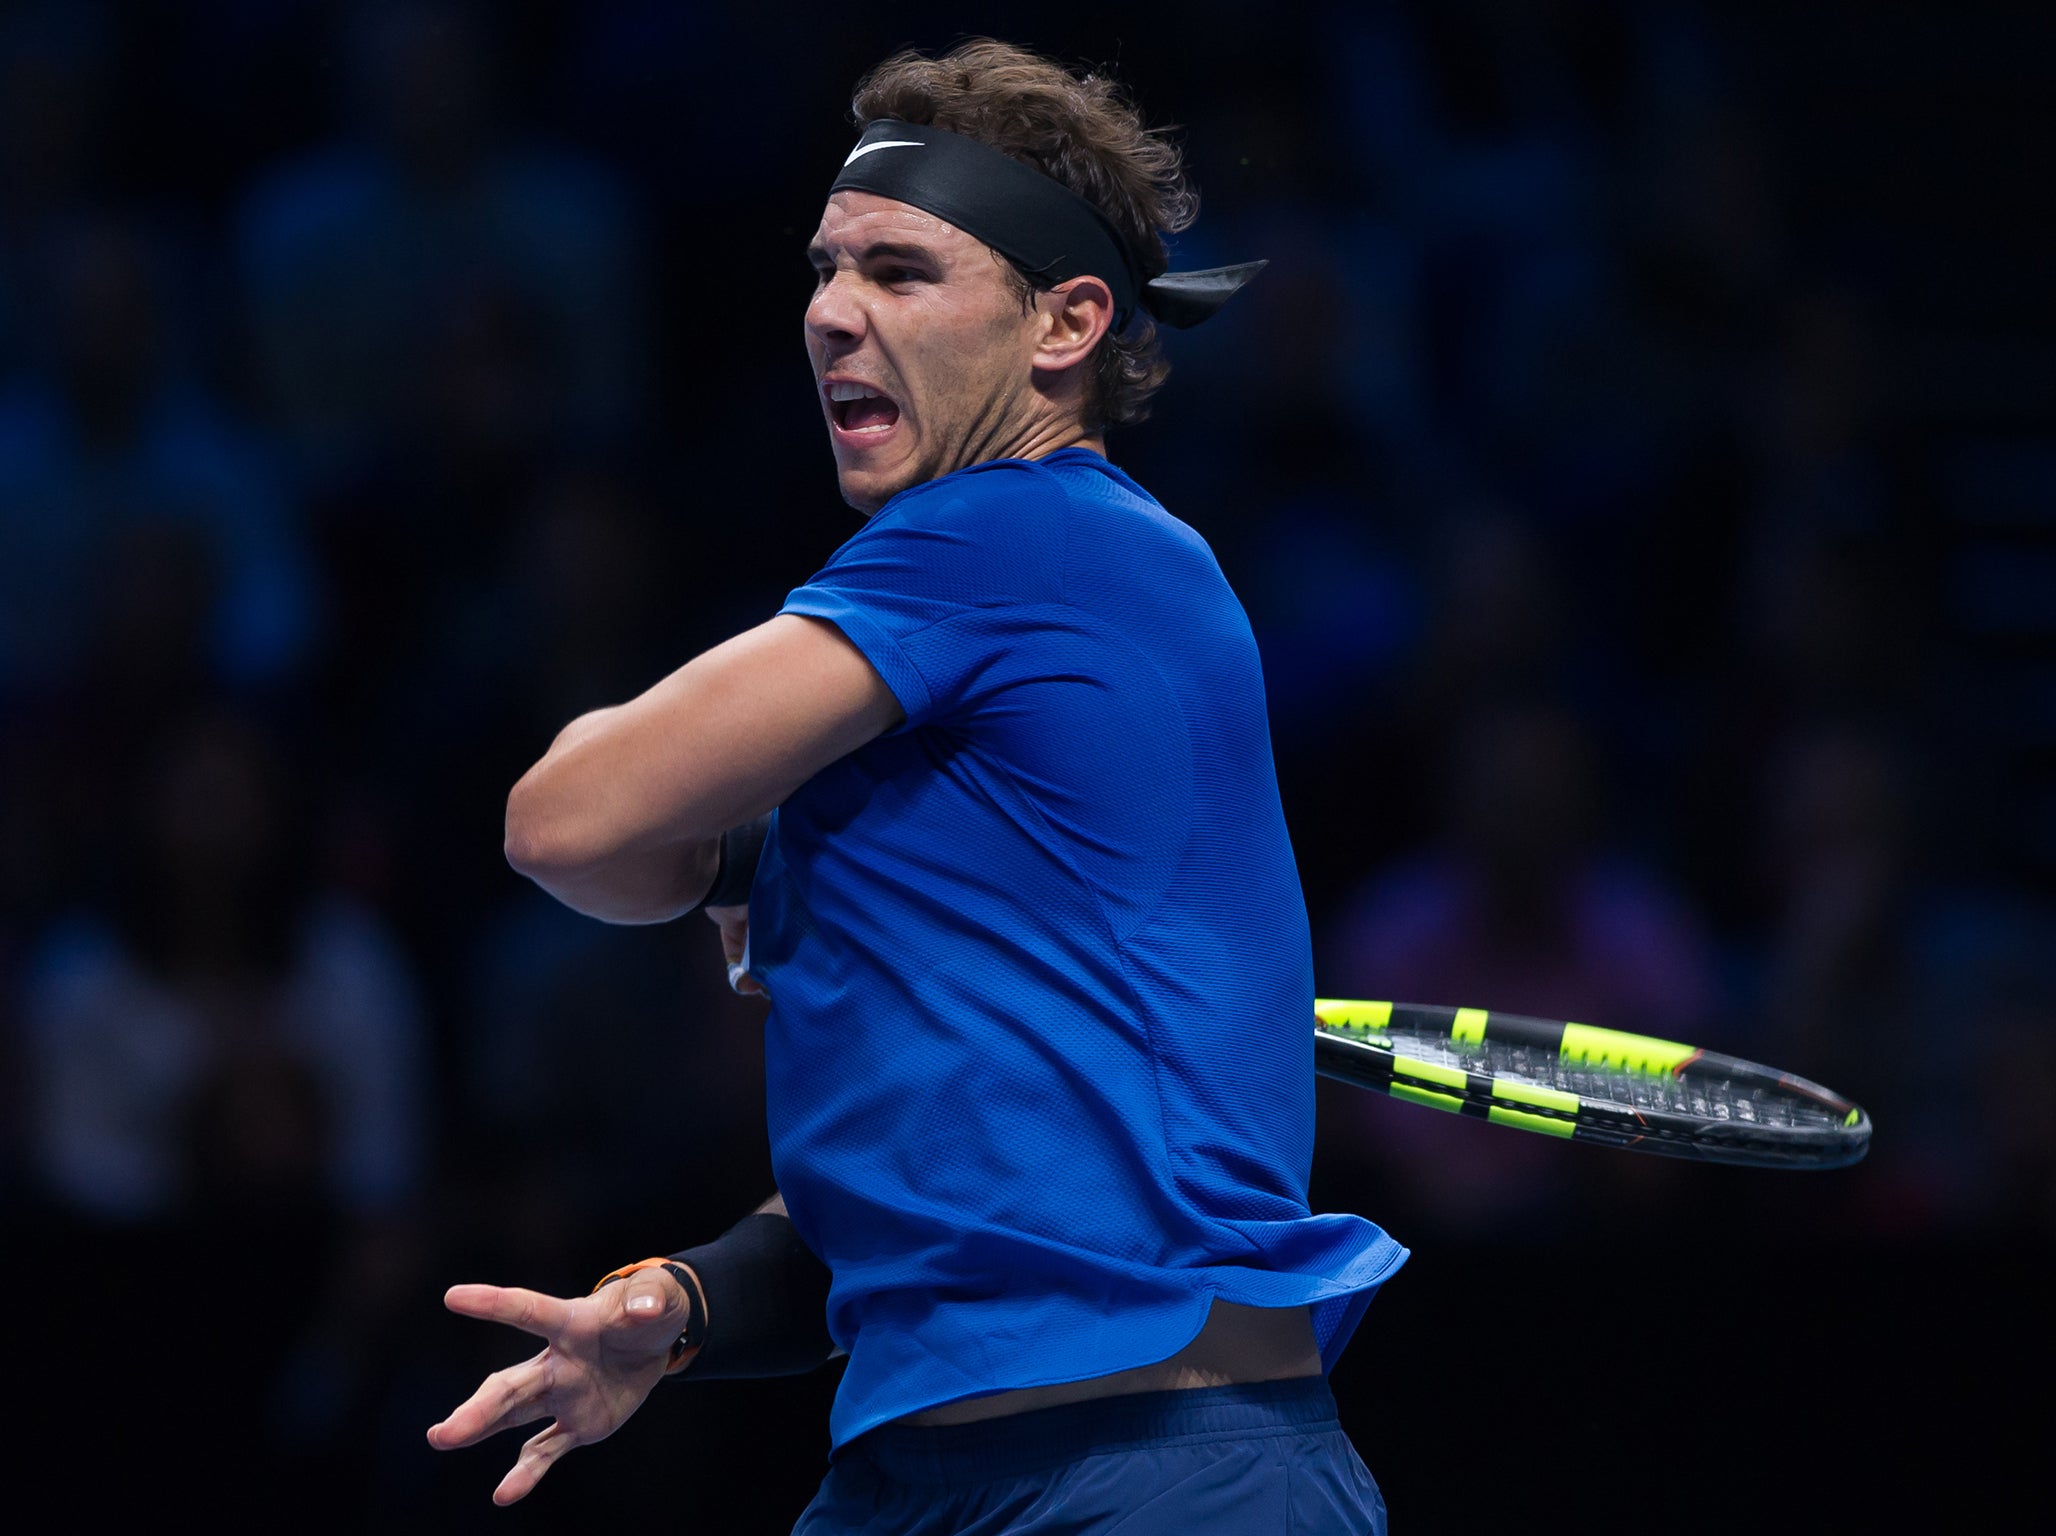 Rafael Nadal to return from his knee injury at Tie Break Tens tournament, The Independent